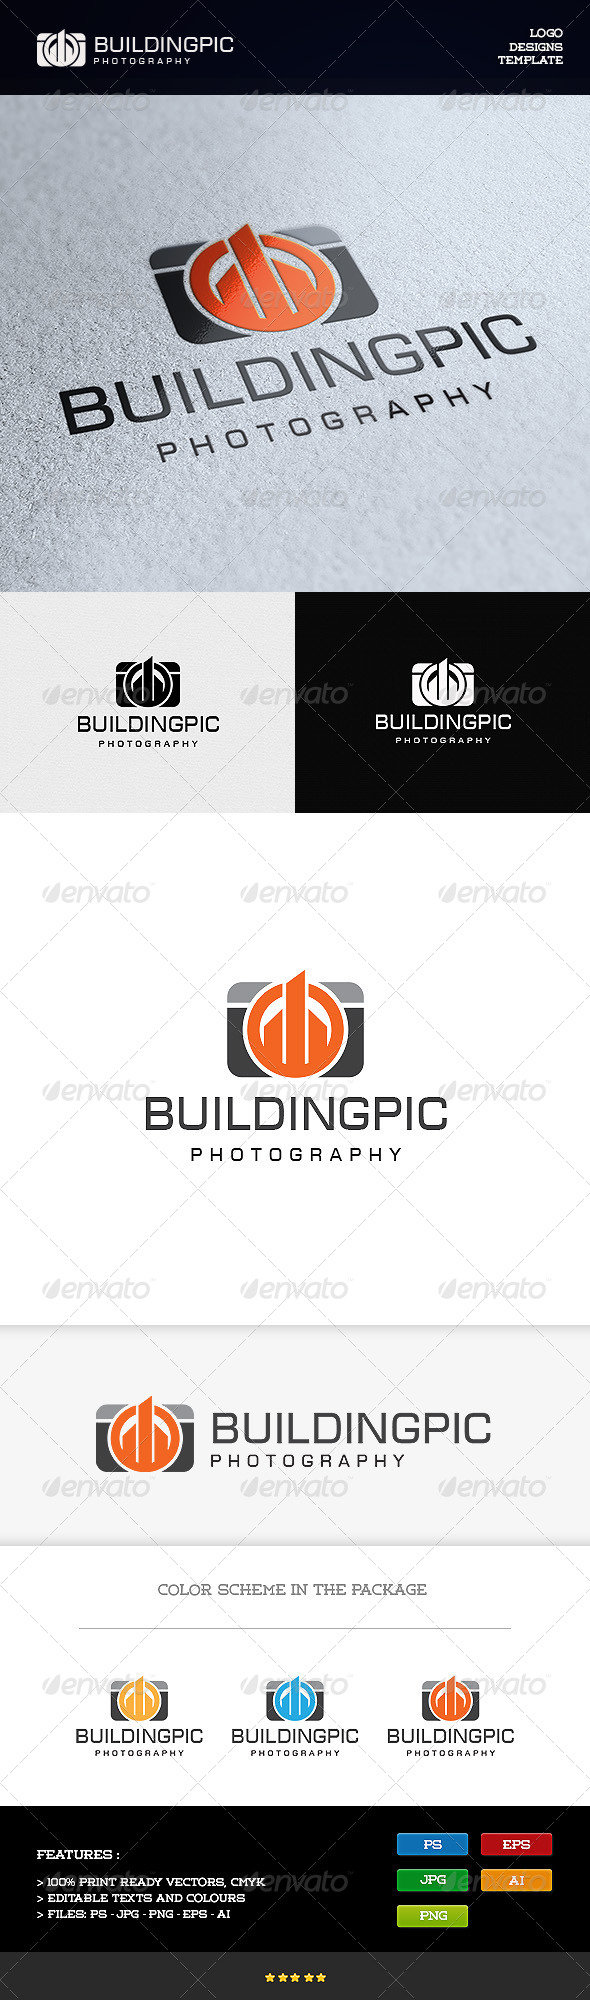 Building Photography